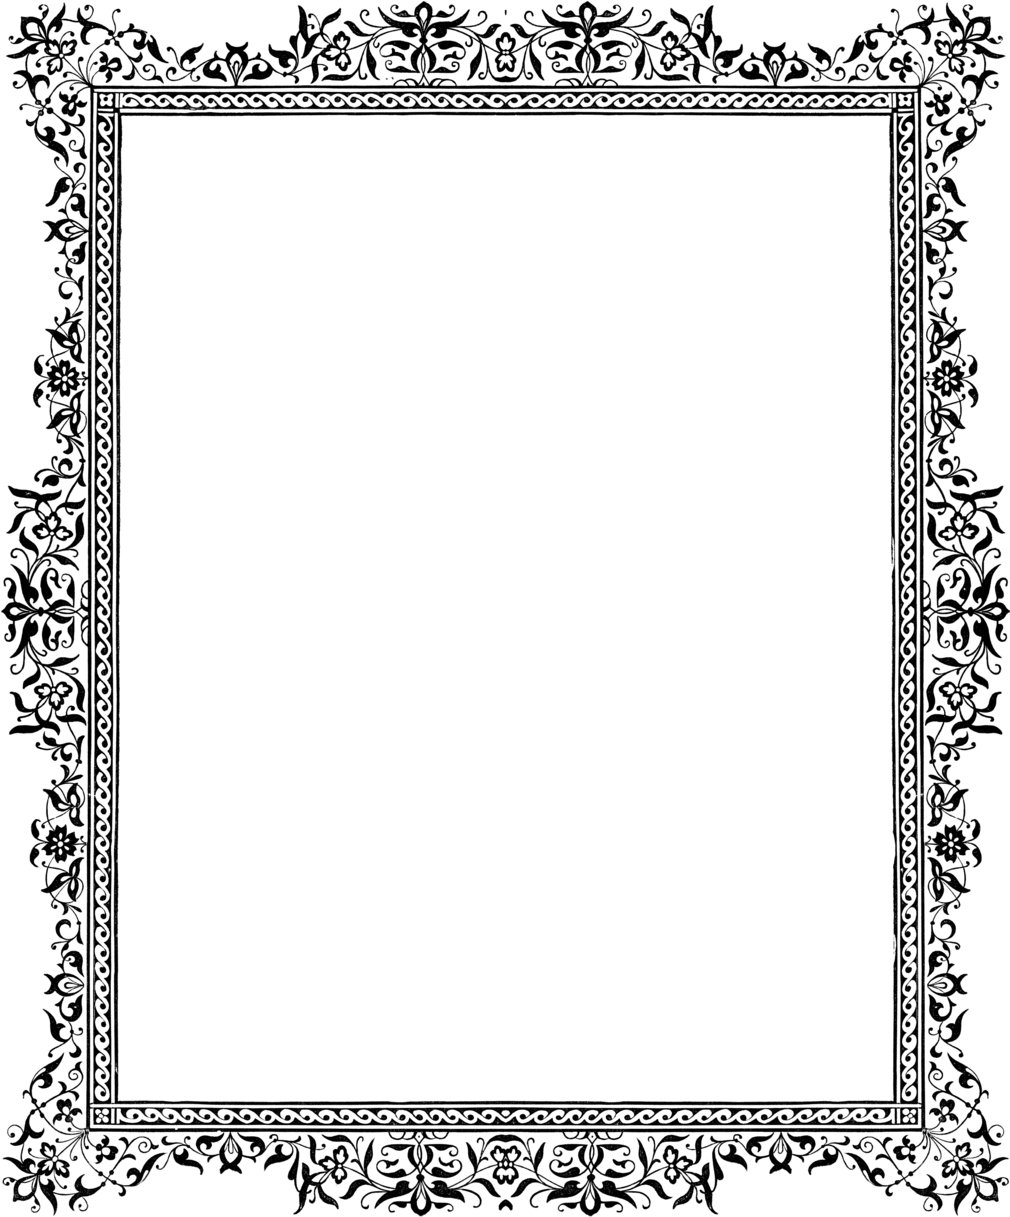 With Black And White Dinosaur Border Free Cliparts That You Can